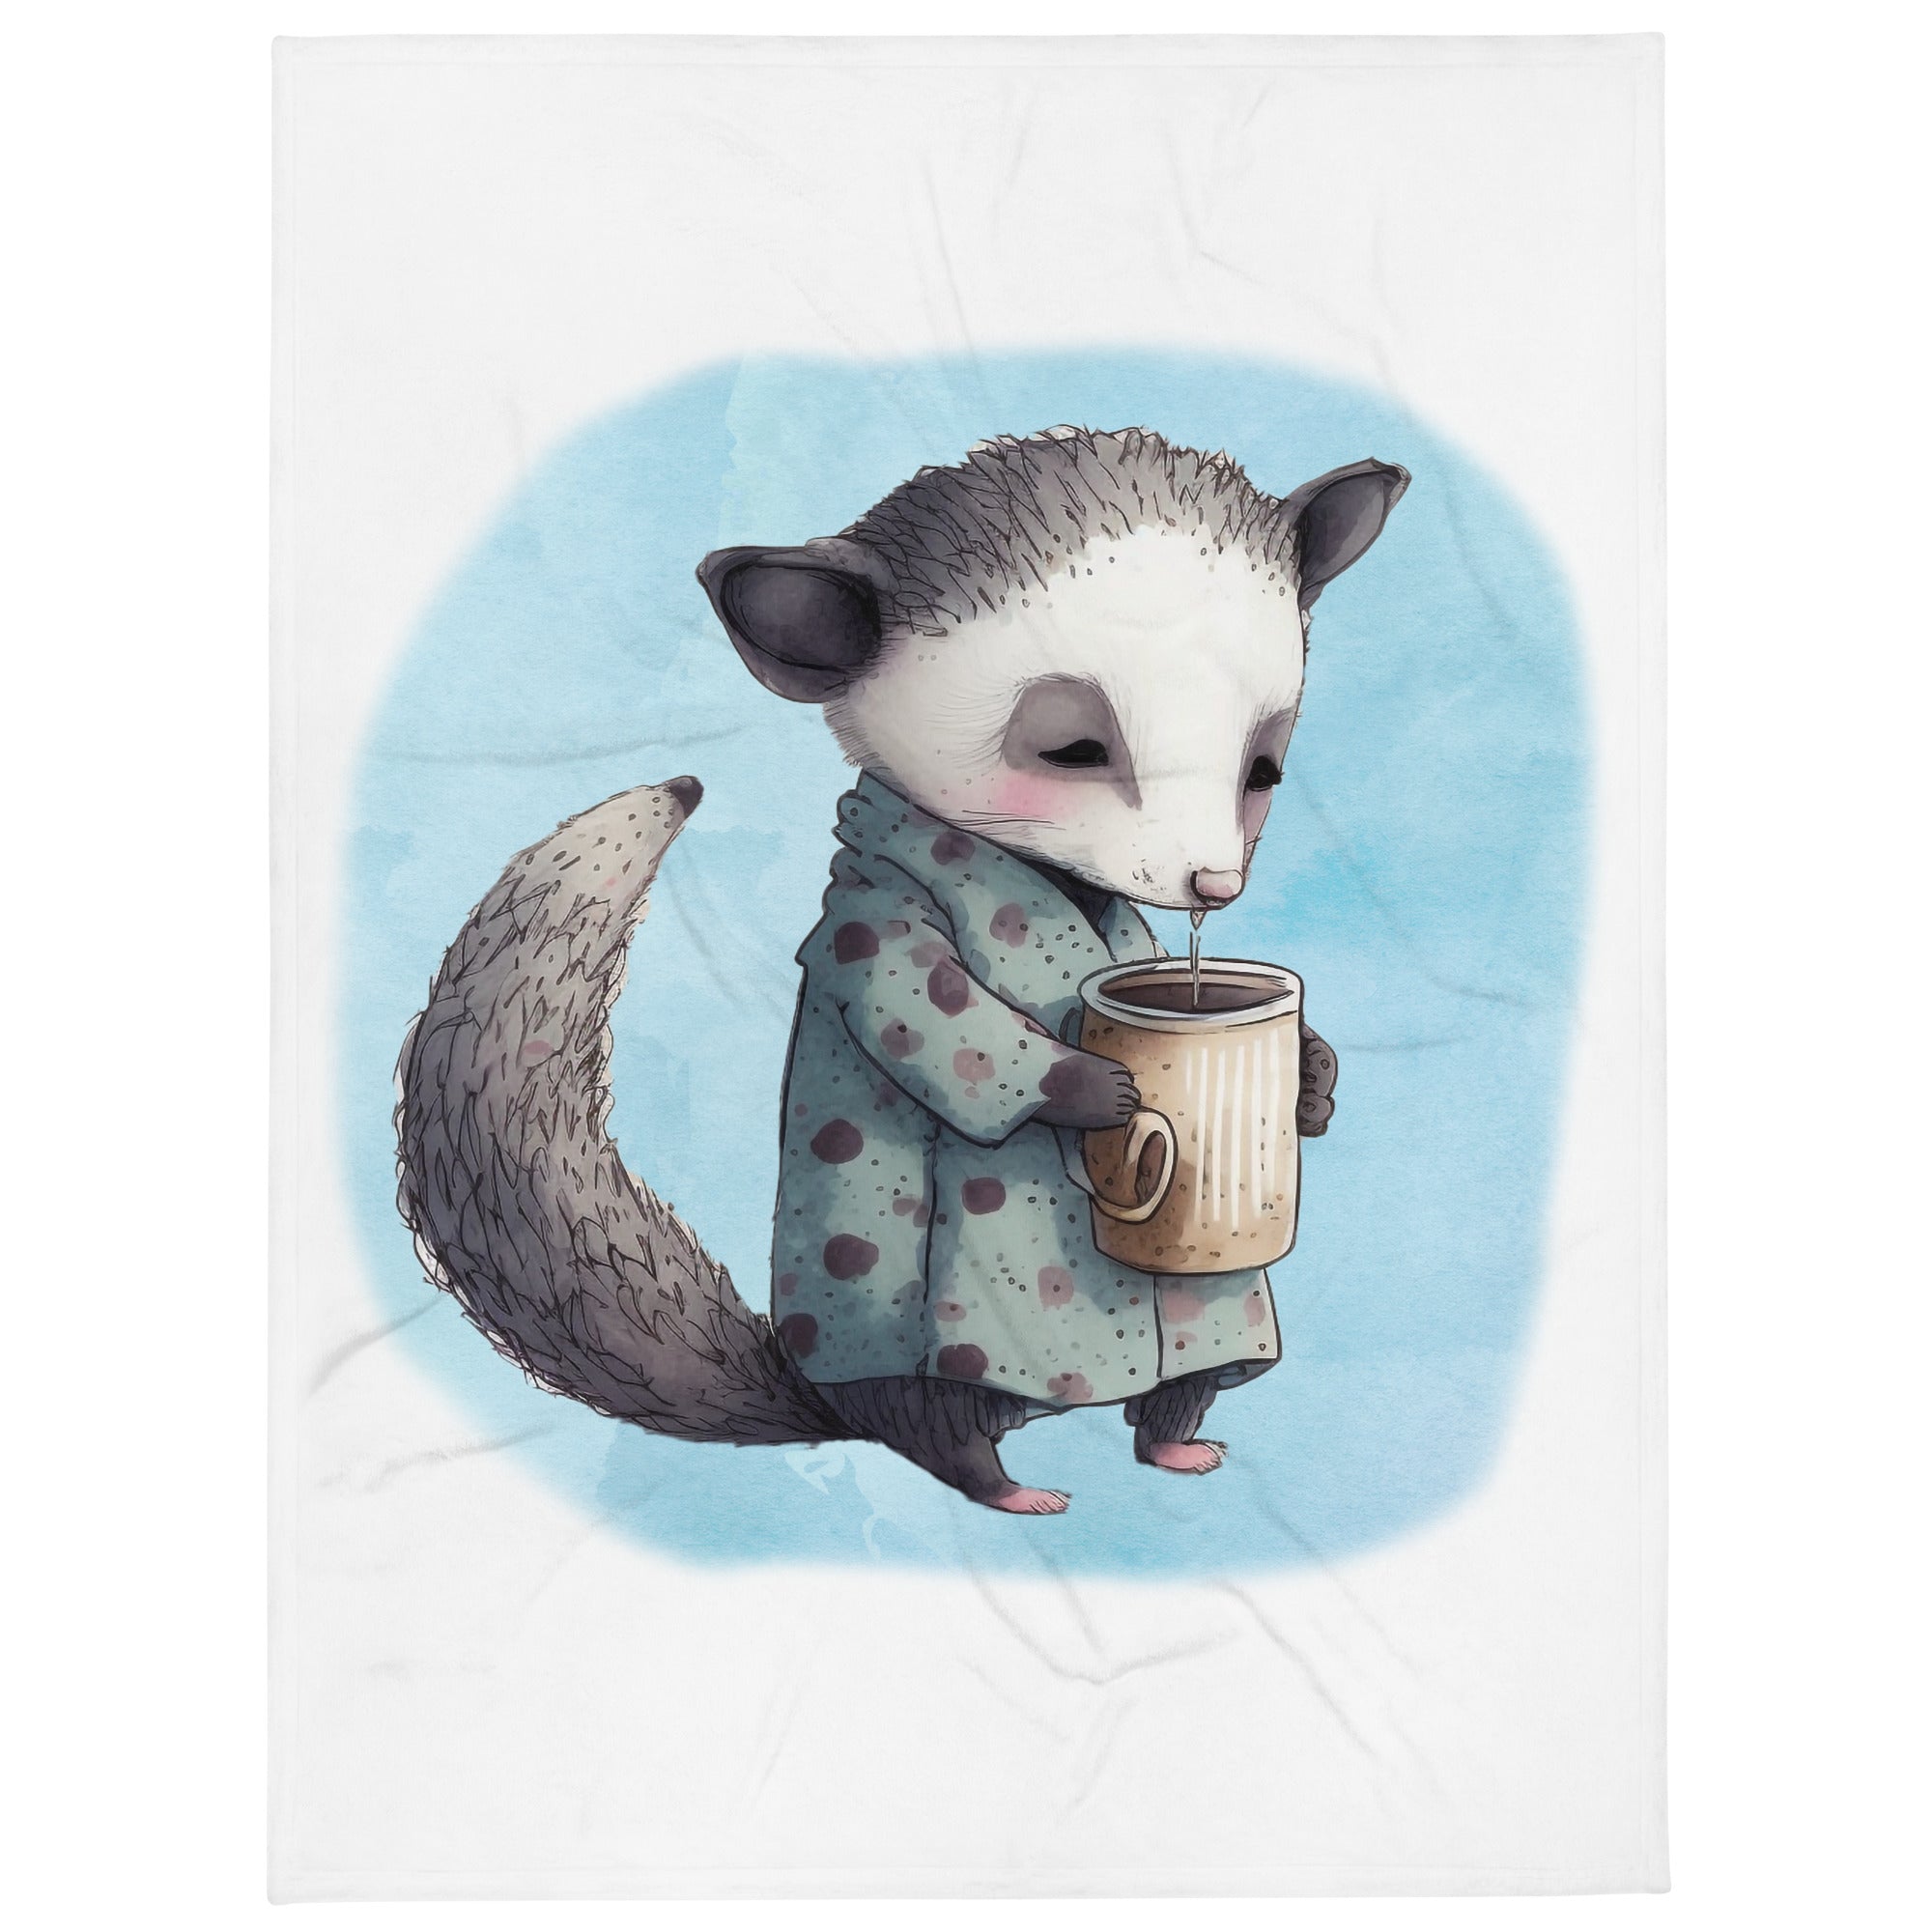 Sleepy Possum 100% Polyester Soft Silk Touch Fabric Throw Blanket - Cozy, Durable and Adorable